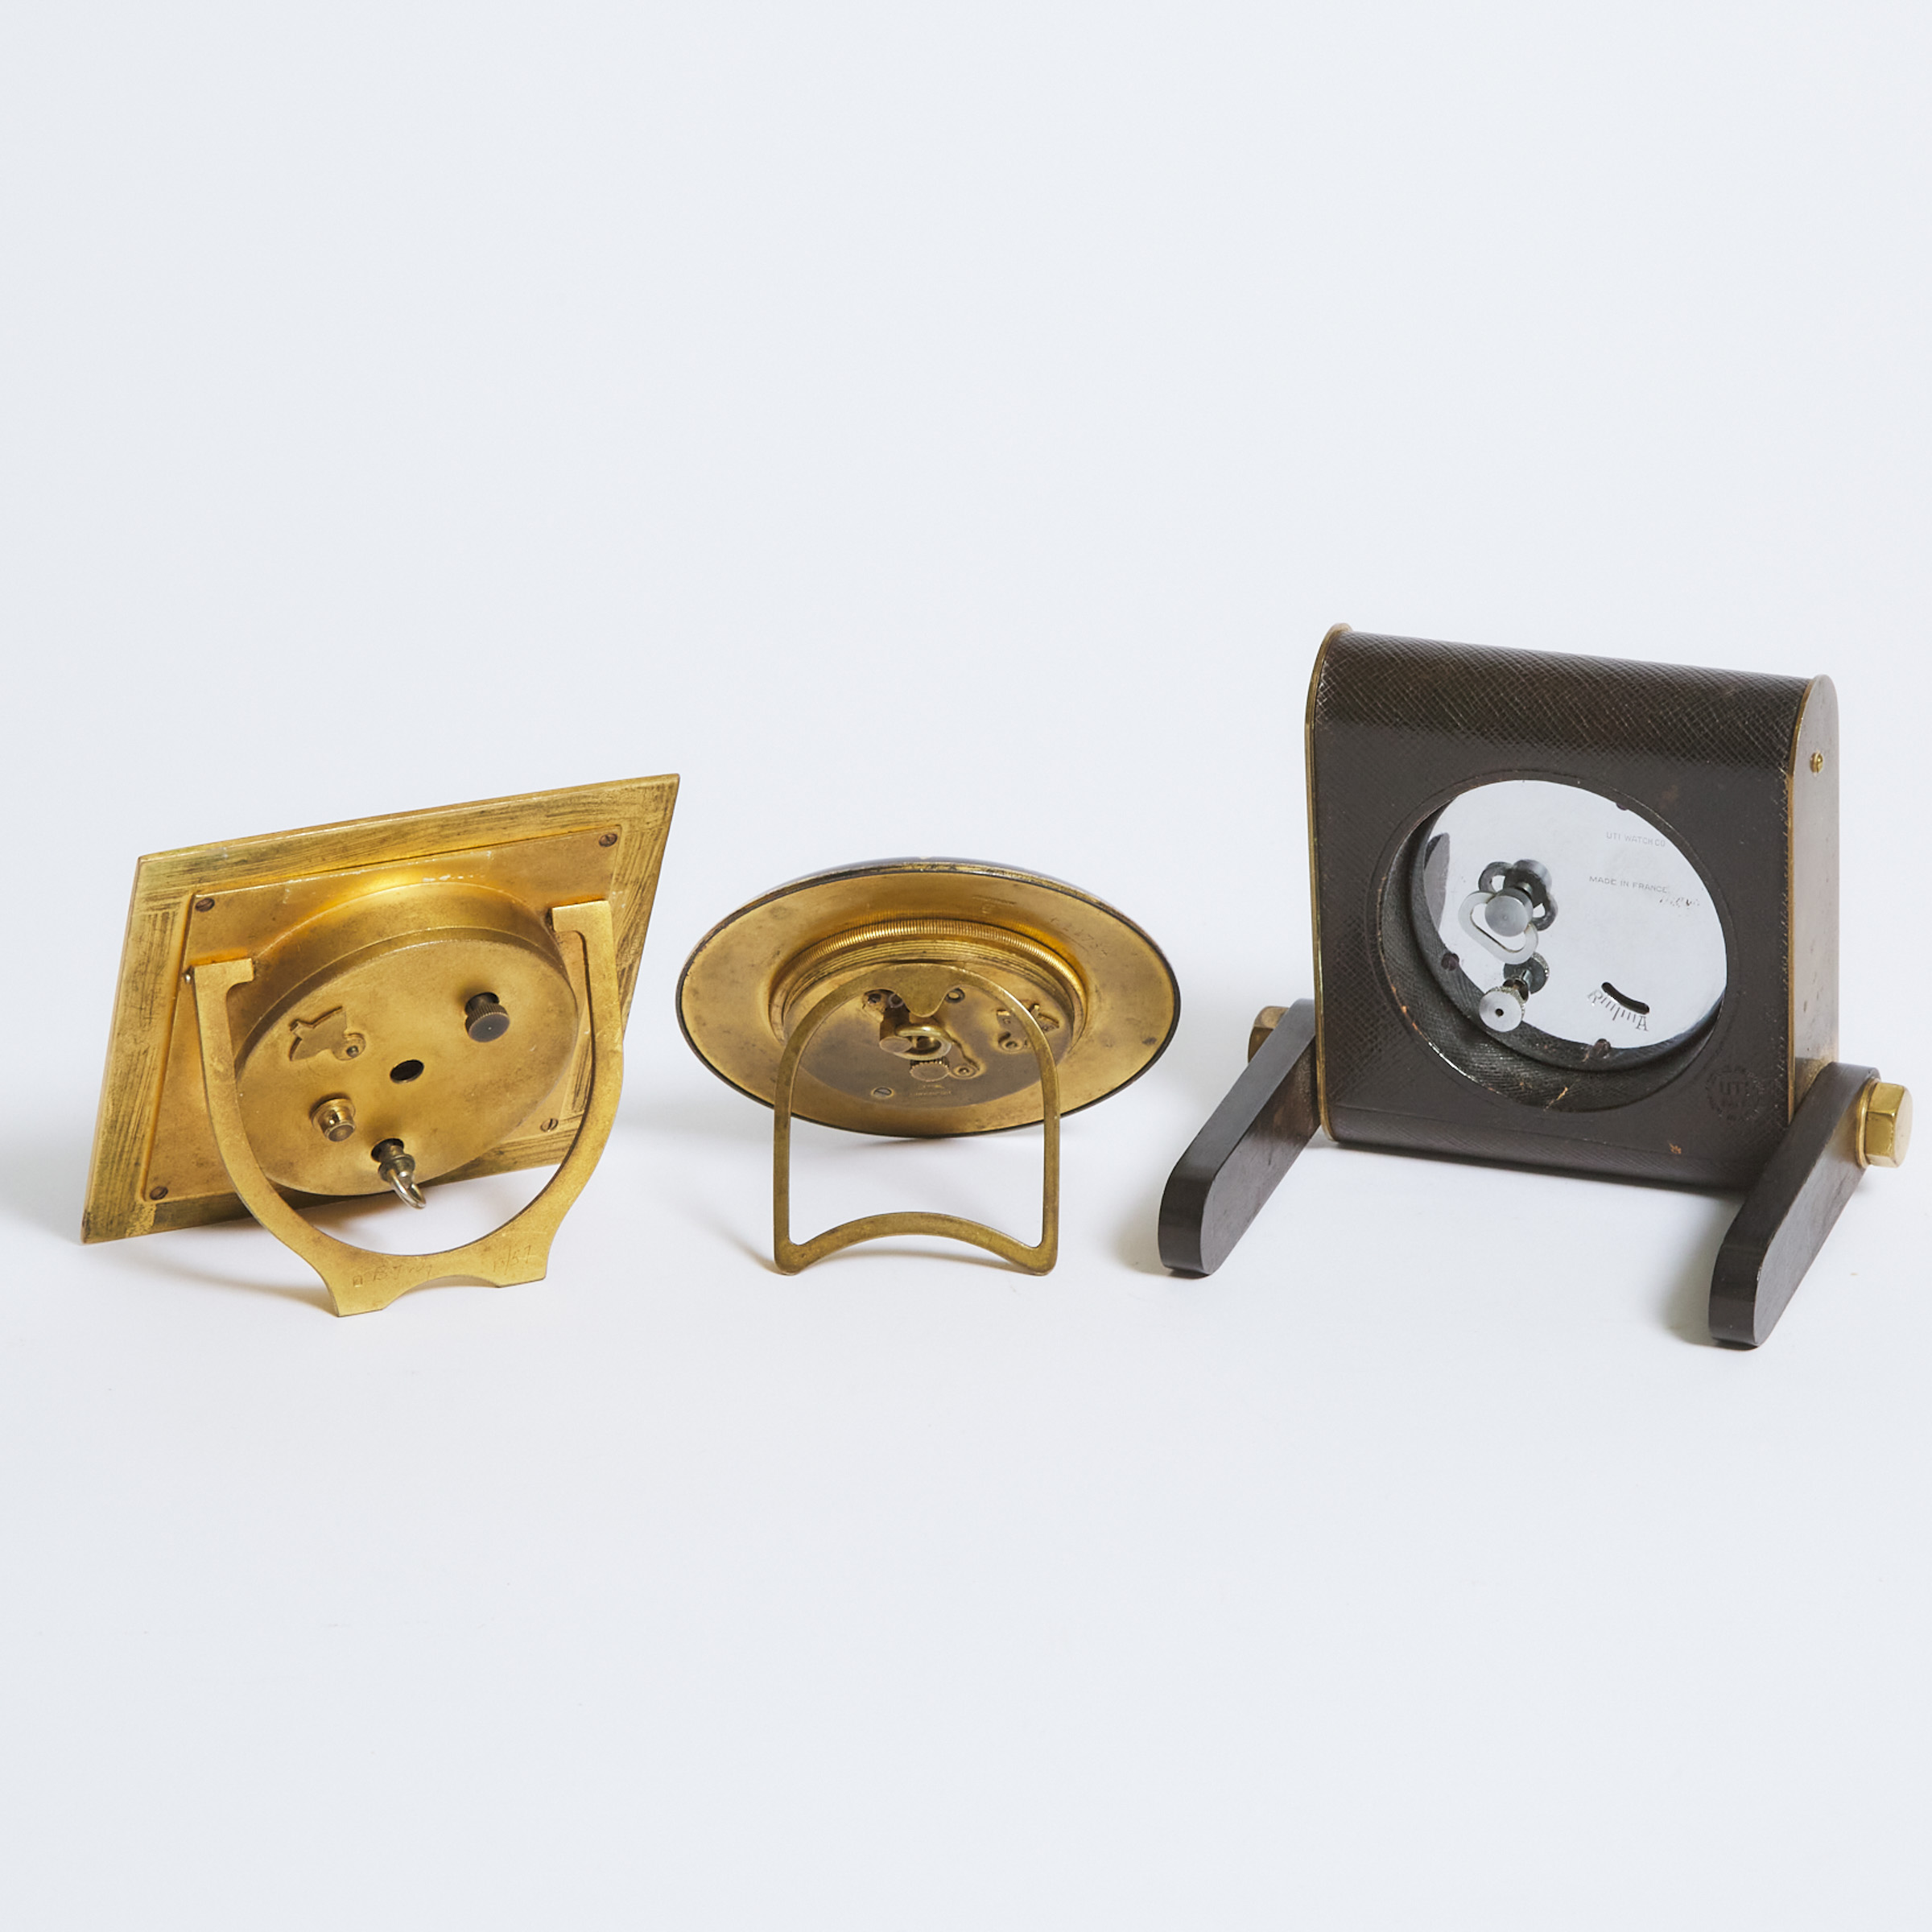 Group of Three Decorative Travelling Clocks, early 20th century